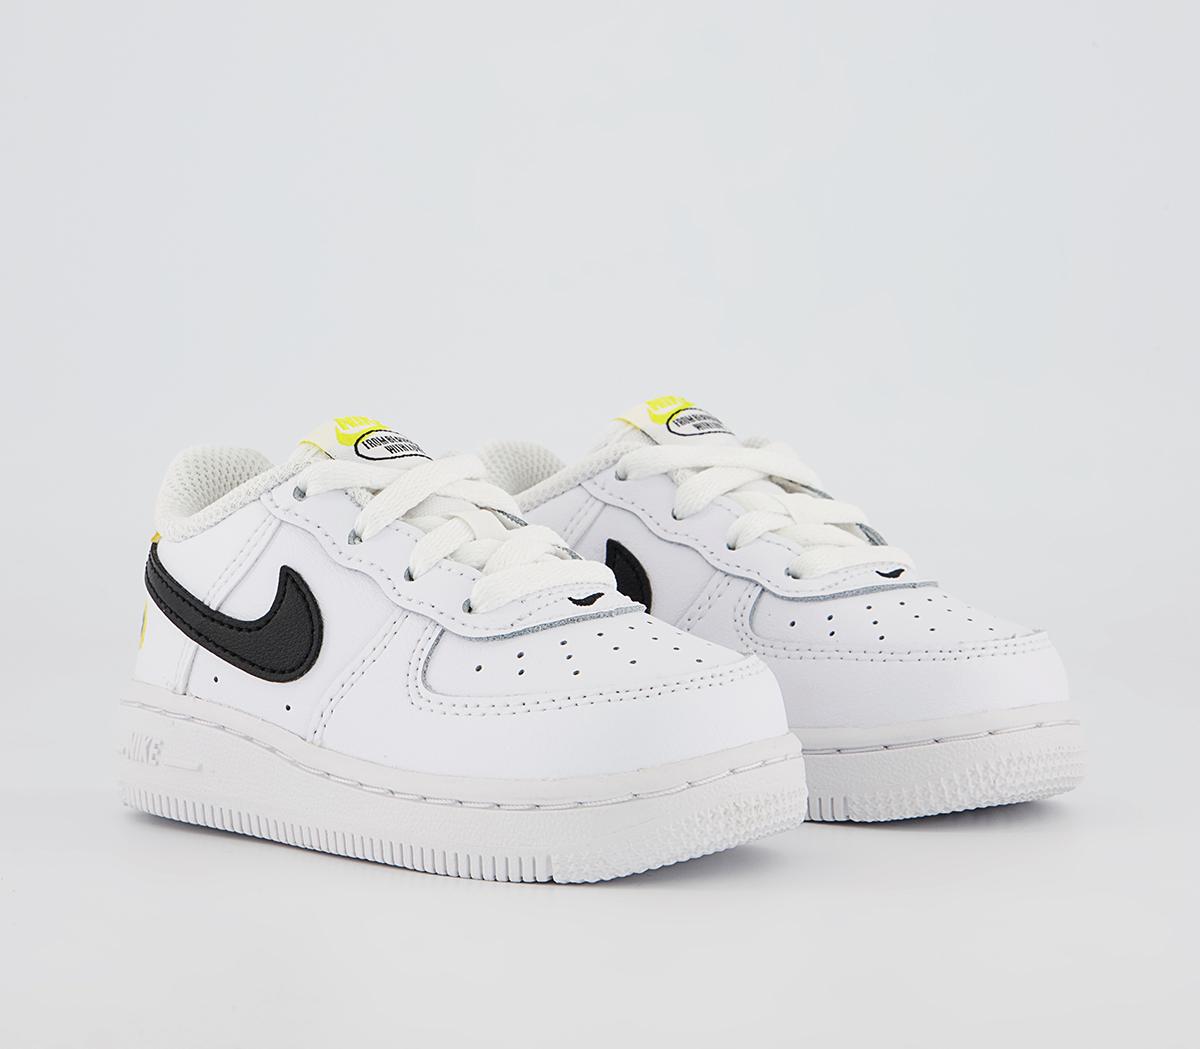 Nike Kids Air Force 1 Infant Trainers White Black Dark Sulfur Mixed Material, 7.5 Infant